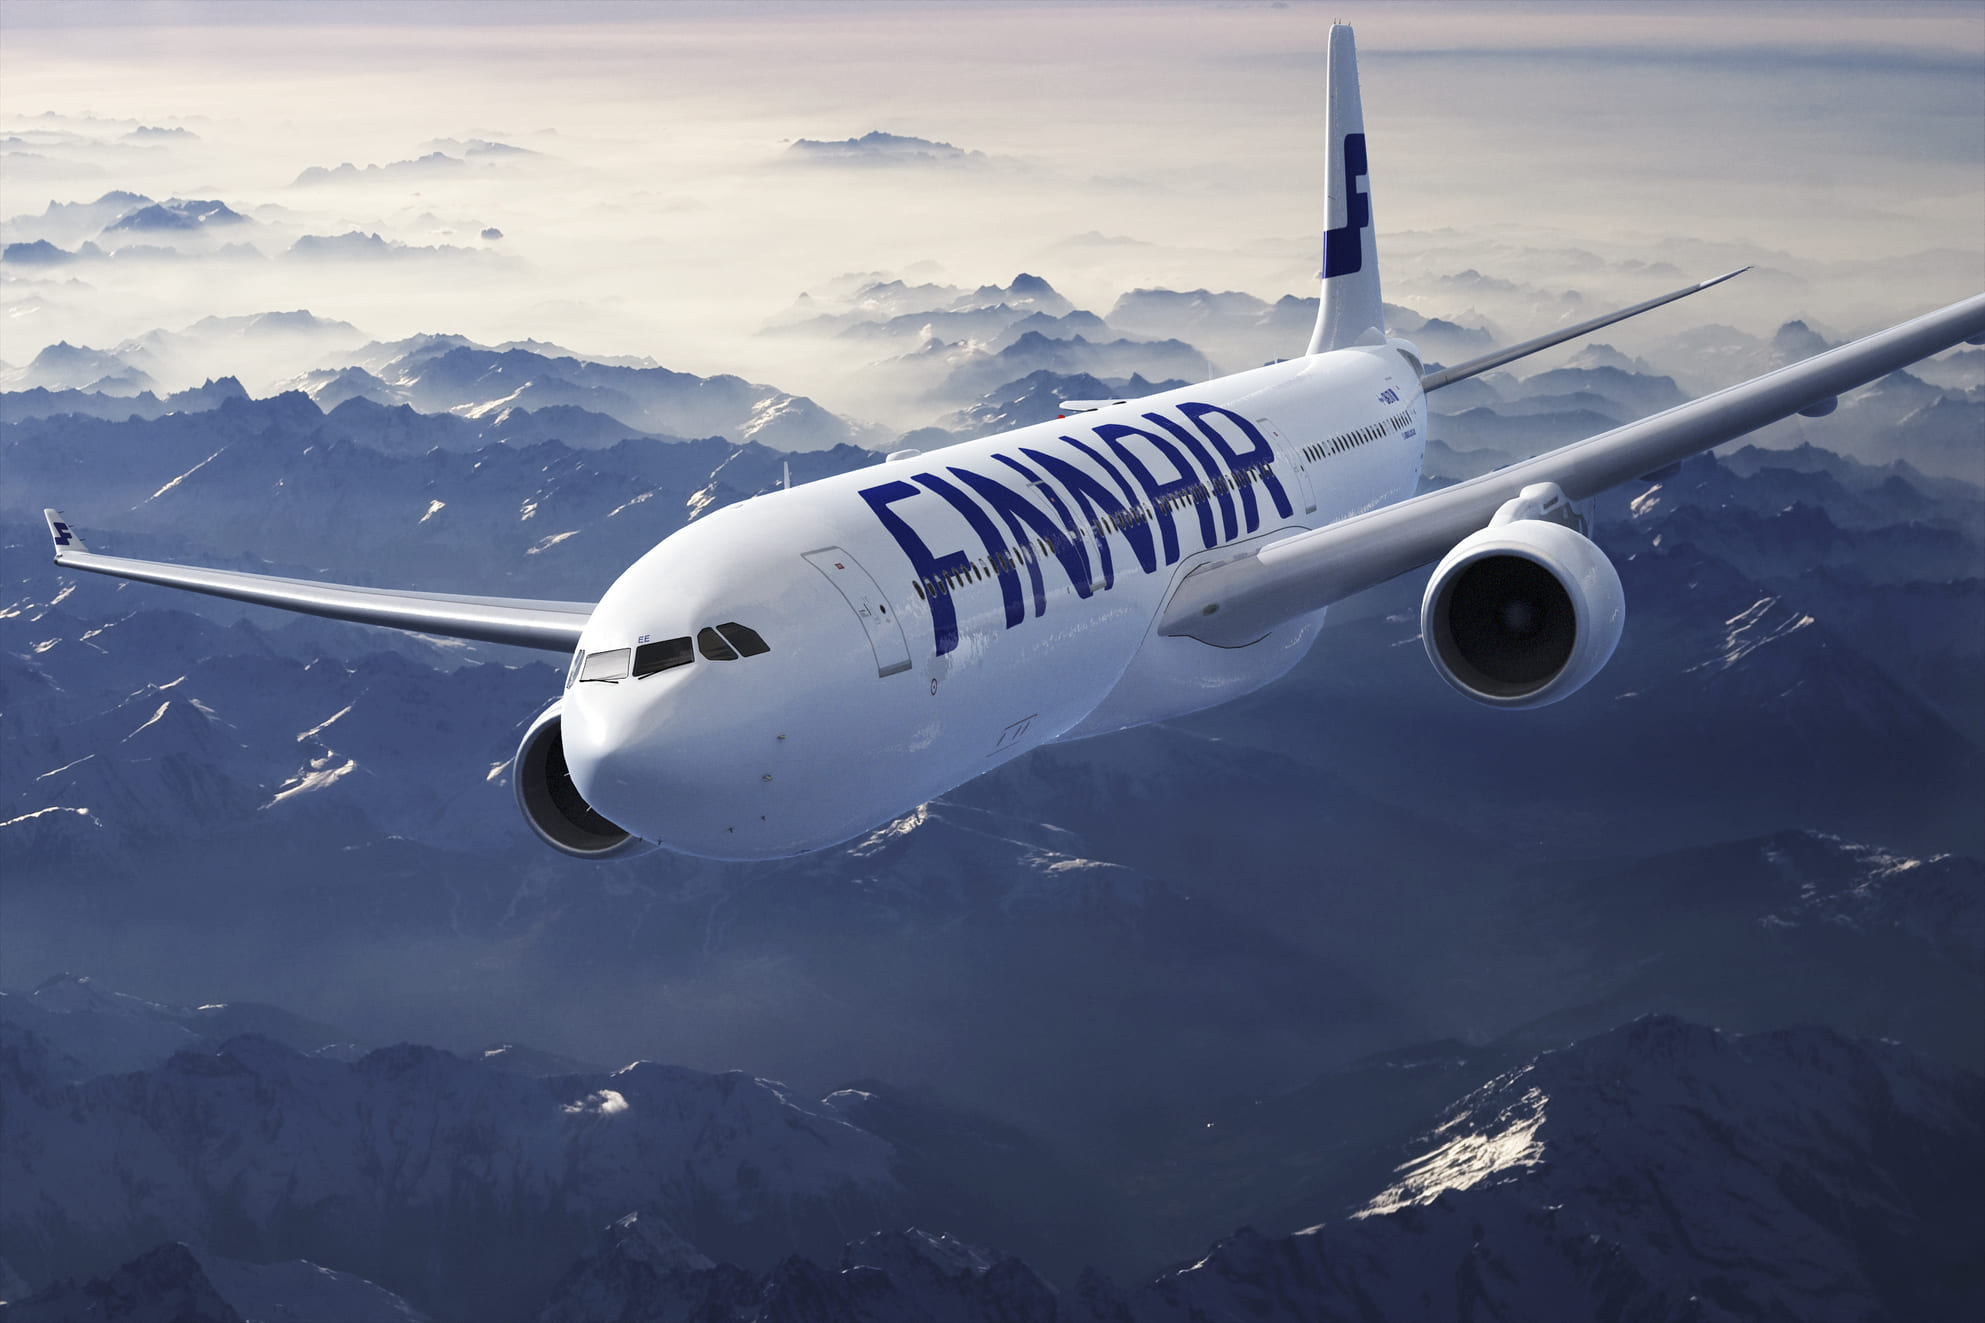 Finnair will elevate the travel experience by introducing the all-new Business and Premium Economy classes from New Delhi.